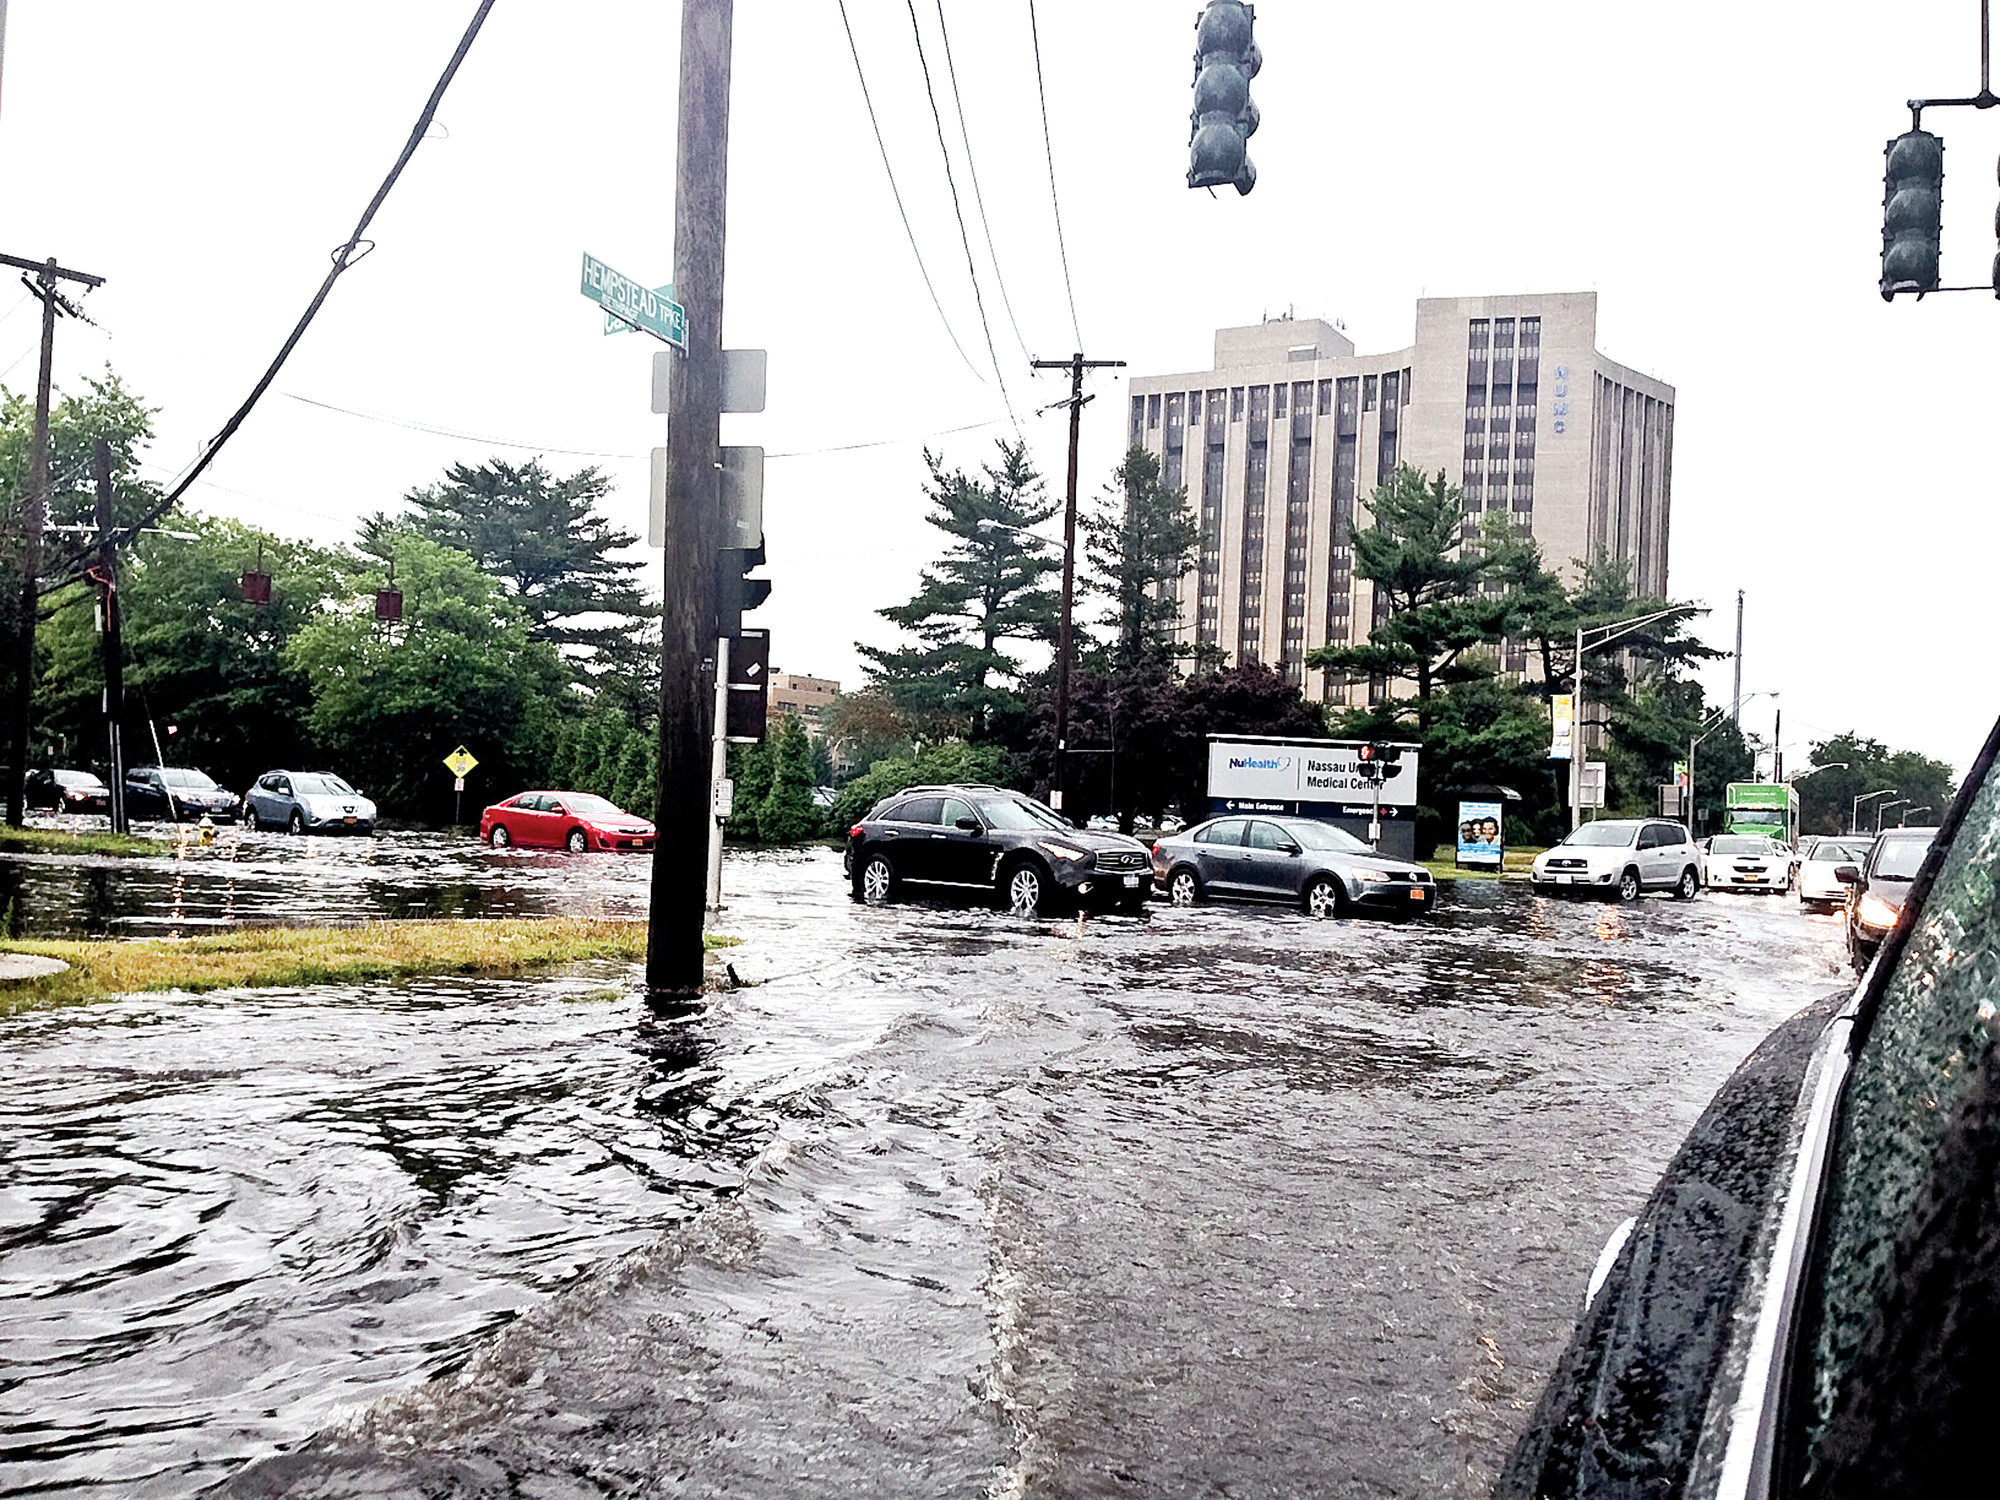 Rainfall inundated Hempstead Turnpike, at its intersection with Carman Avenue, on July 30.